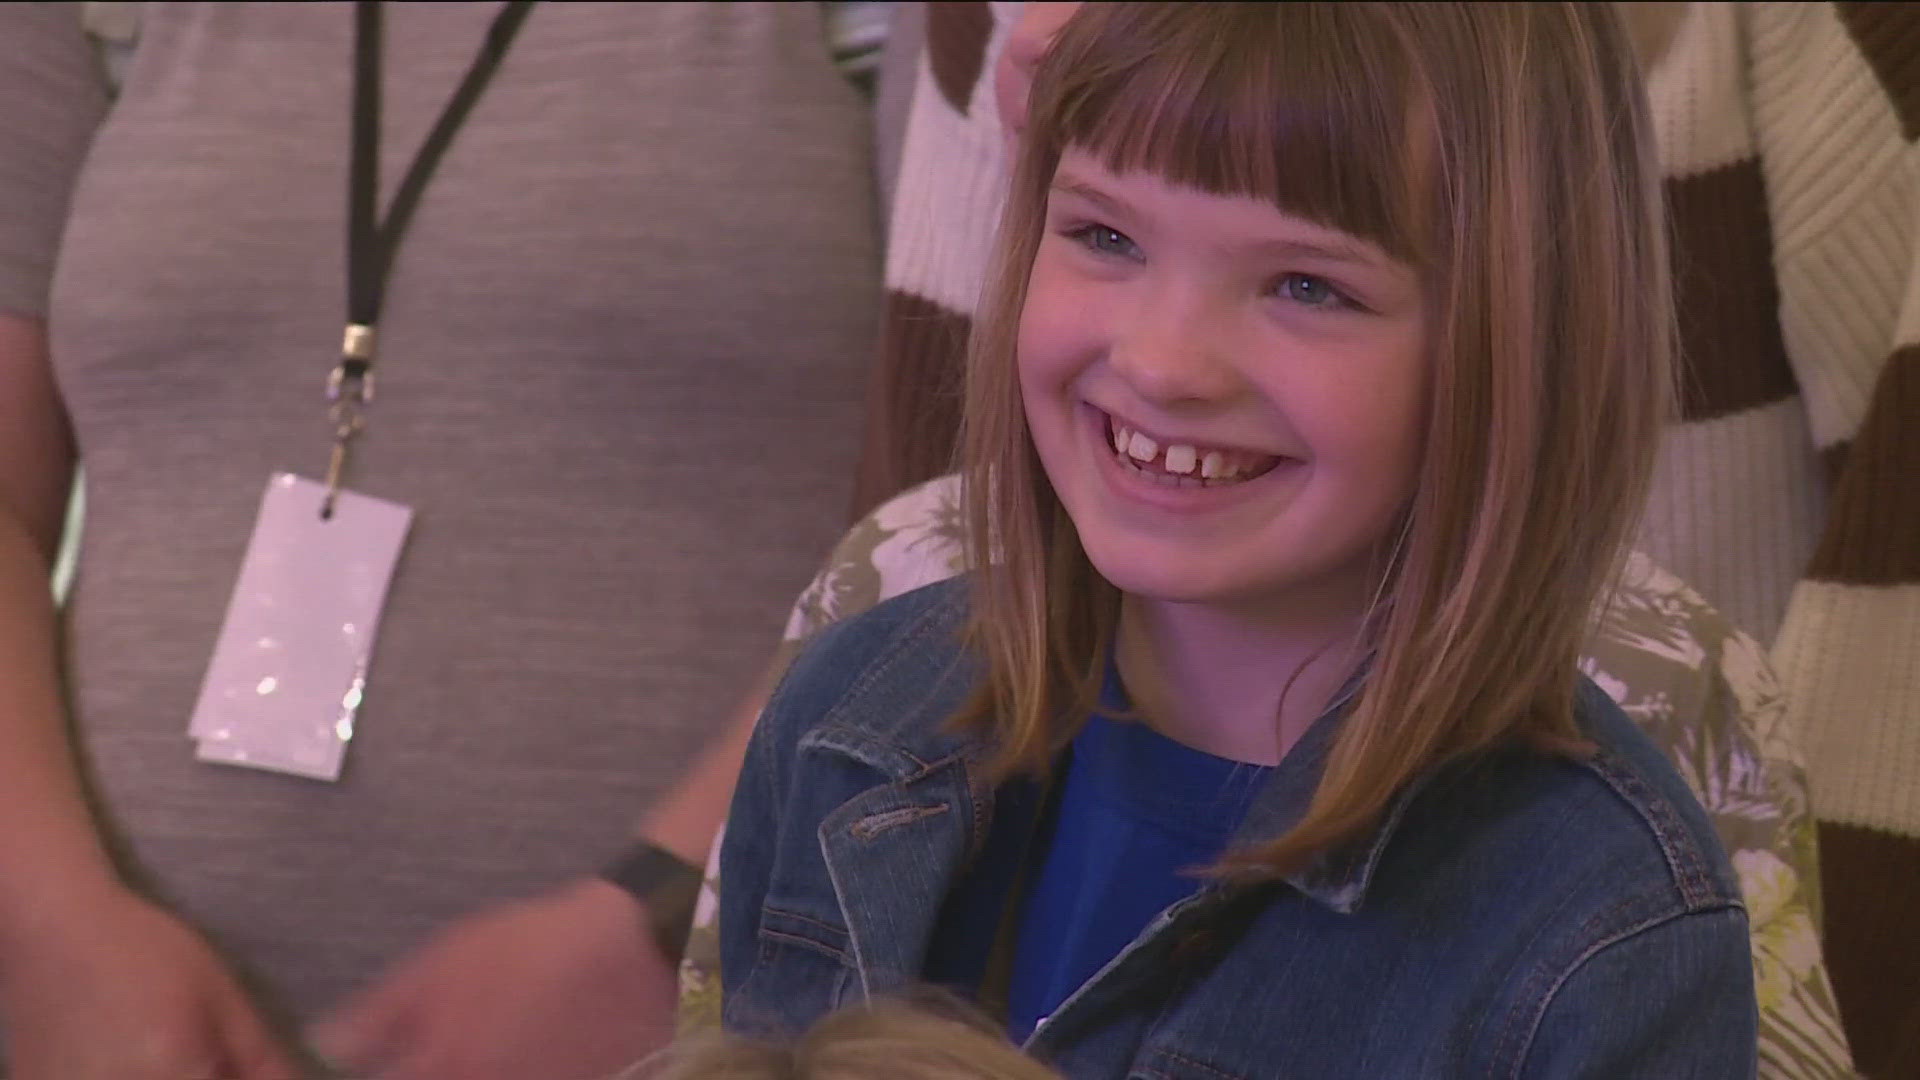 In Monday's Communities That KARE, we meet a 9-year-old girl who spent a magical day with her family at the MOA.